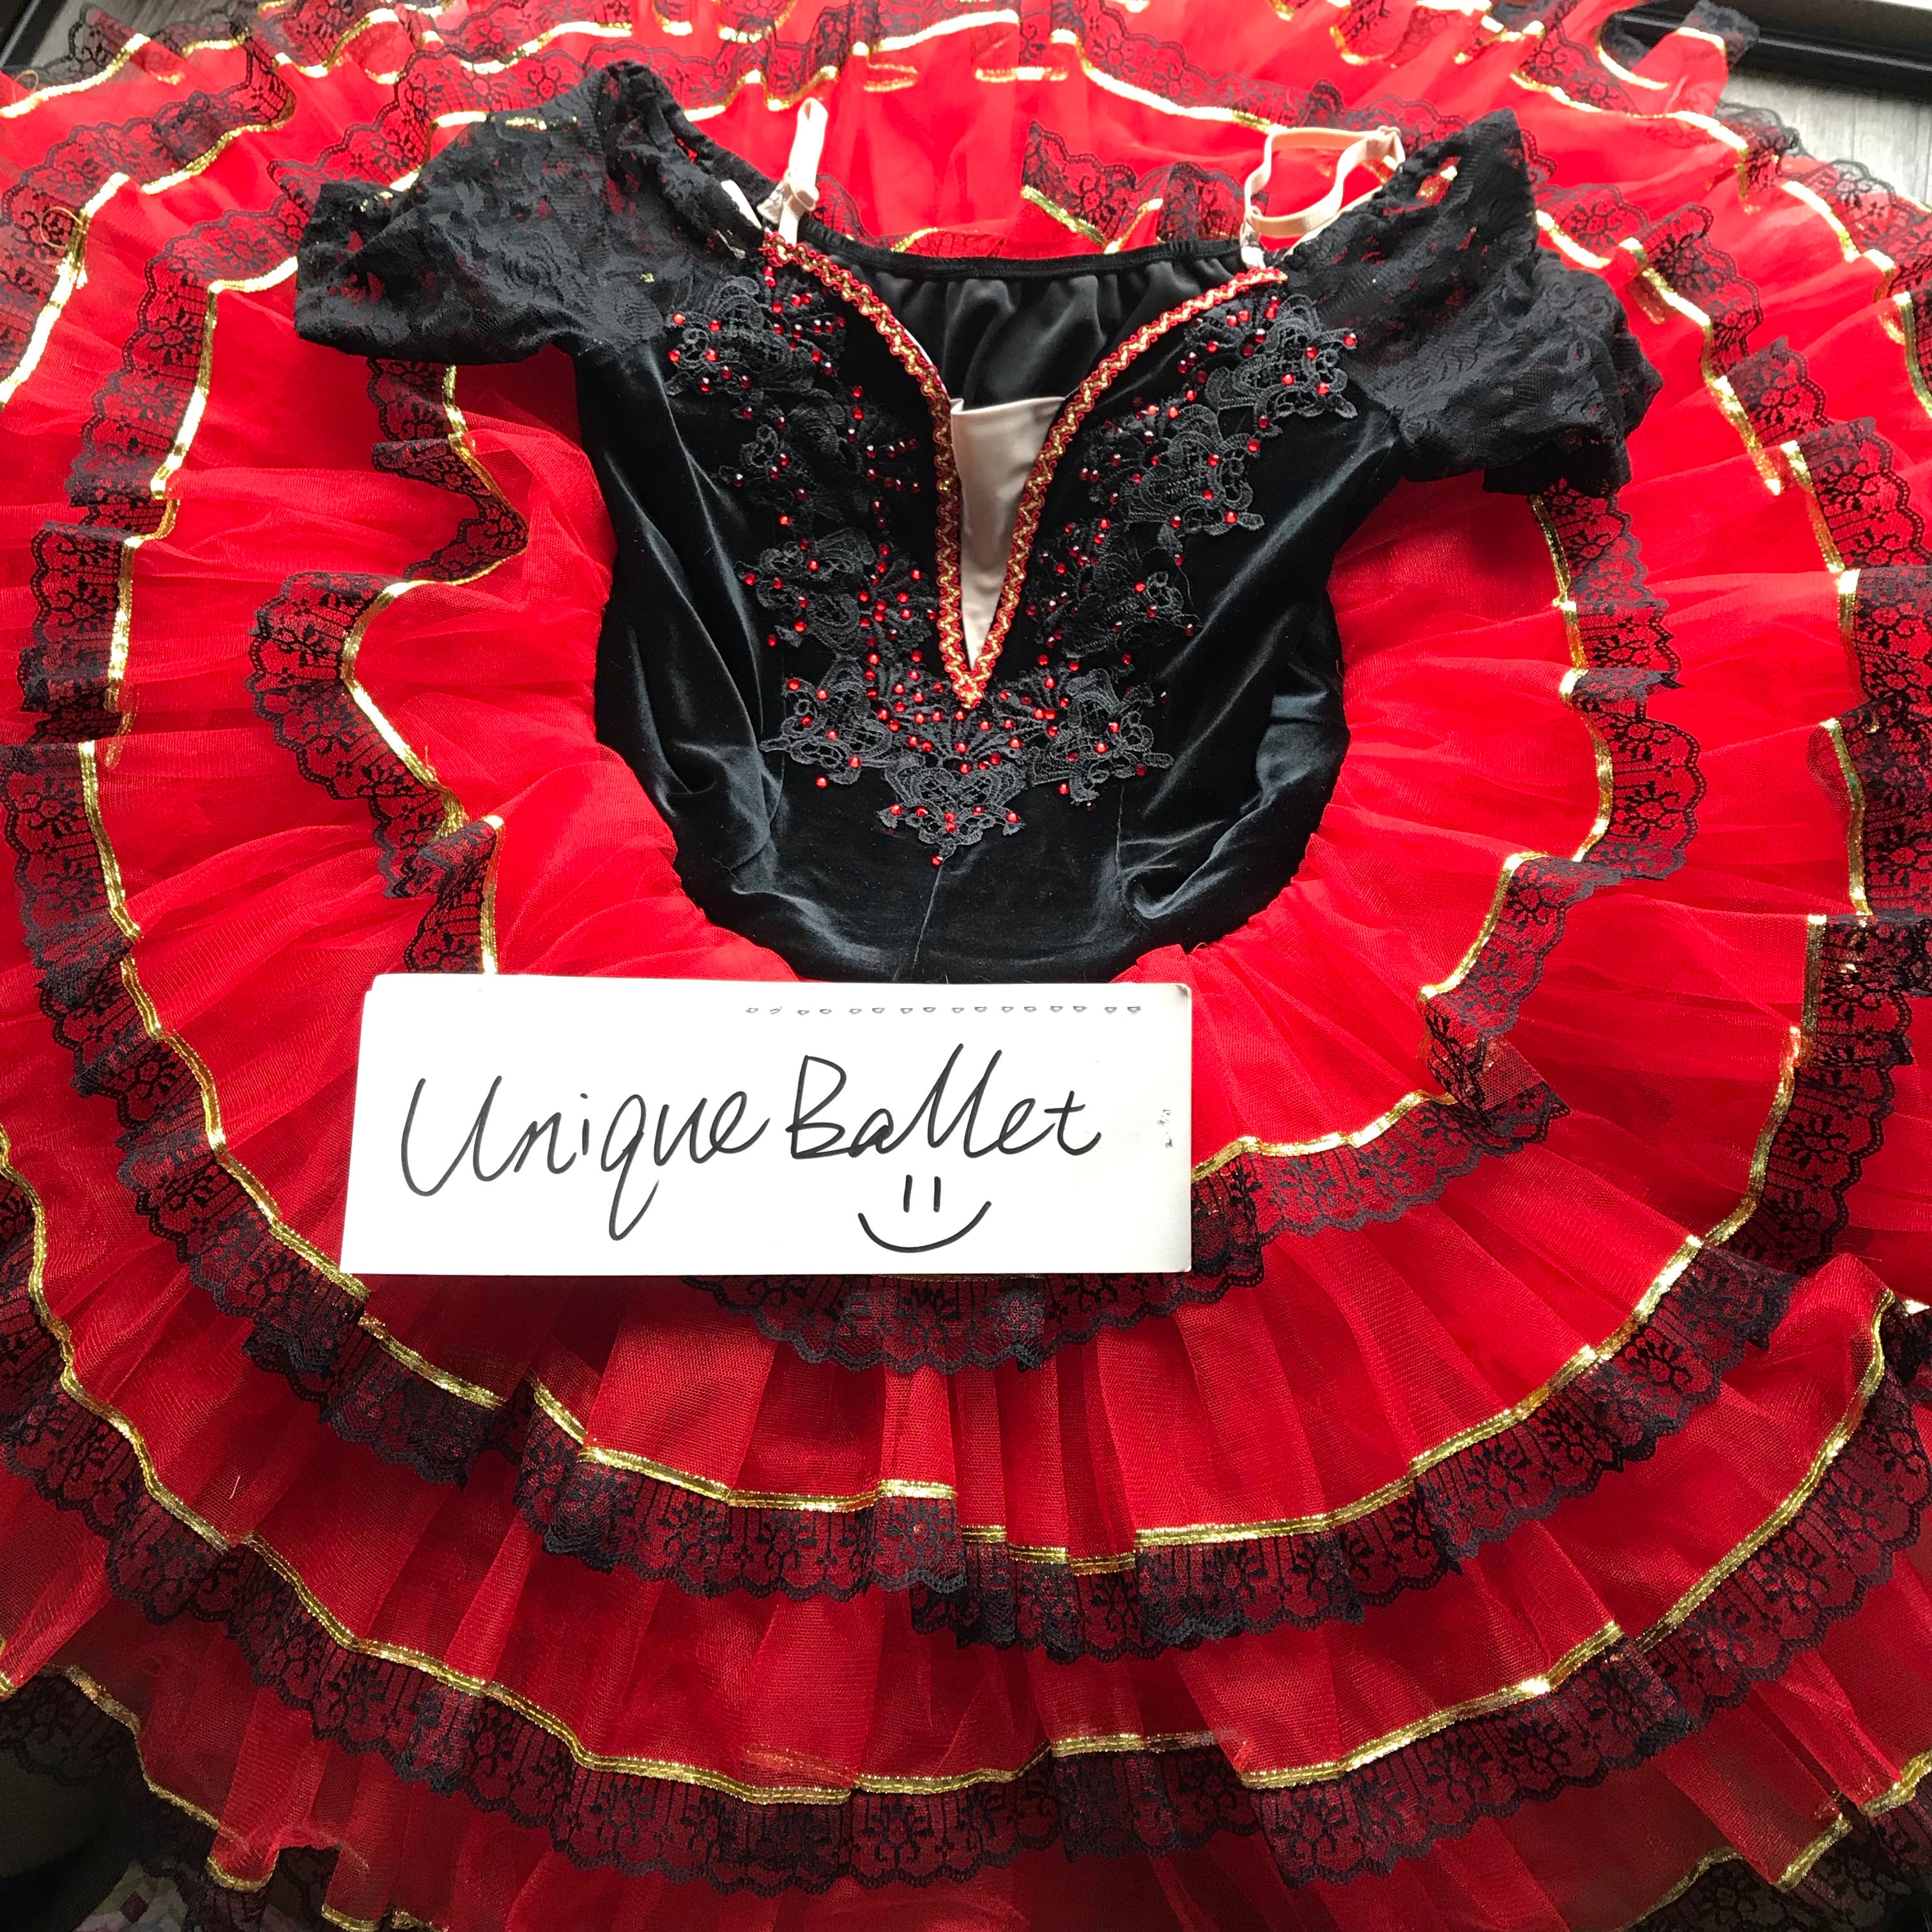 Professional Don Quixote Ballet Classical Tutu Costume Red Kitri Act 2 Variation Ballet Stage Costume